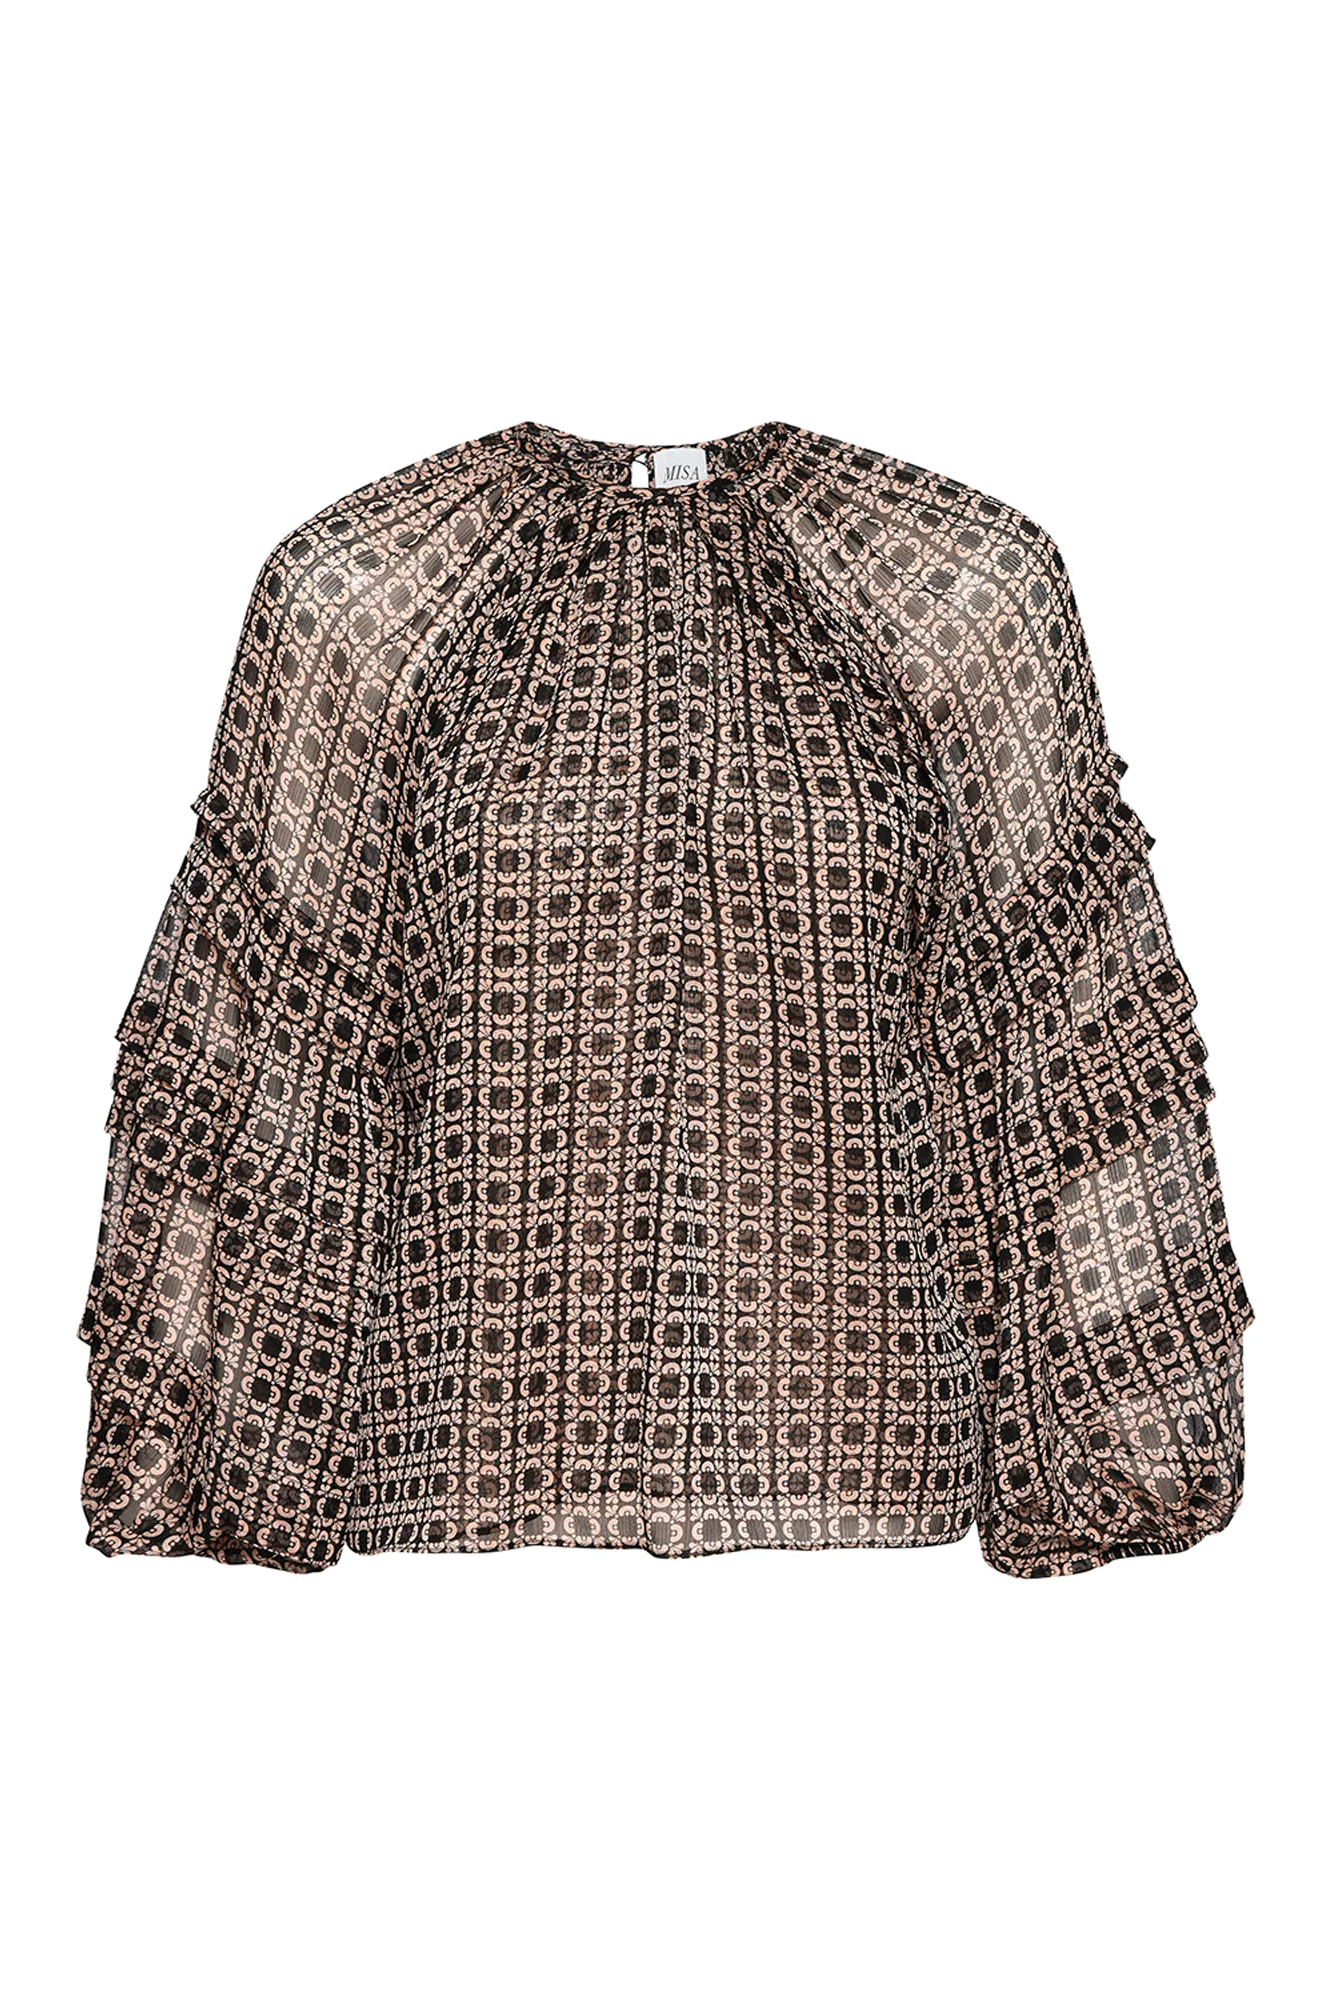 The Victoire Top from Misa combines fashion-forward lattice tile print chiffon with double-edged pleated ruffles and elastic cuffs for a sophisticated look. Finished with a back button keyhole closure. Put together a look that dazzles with the Victoire Top.